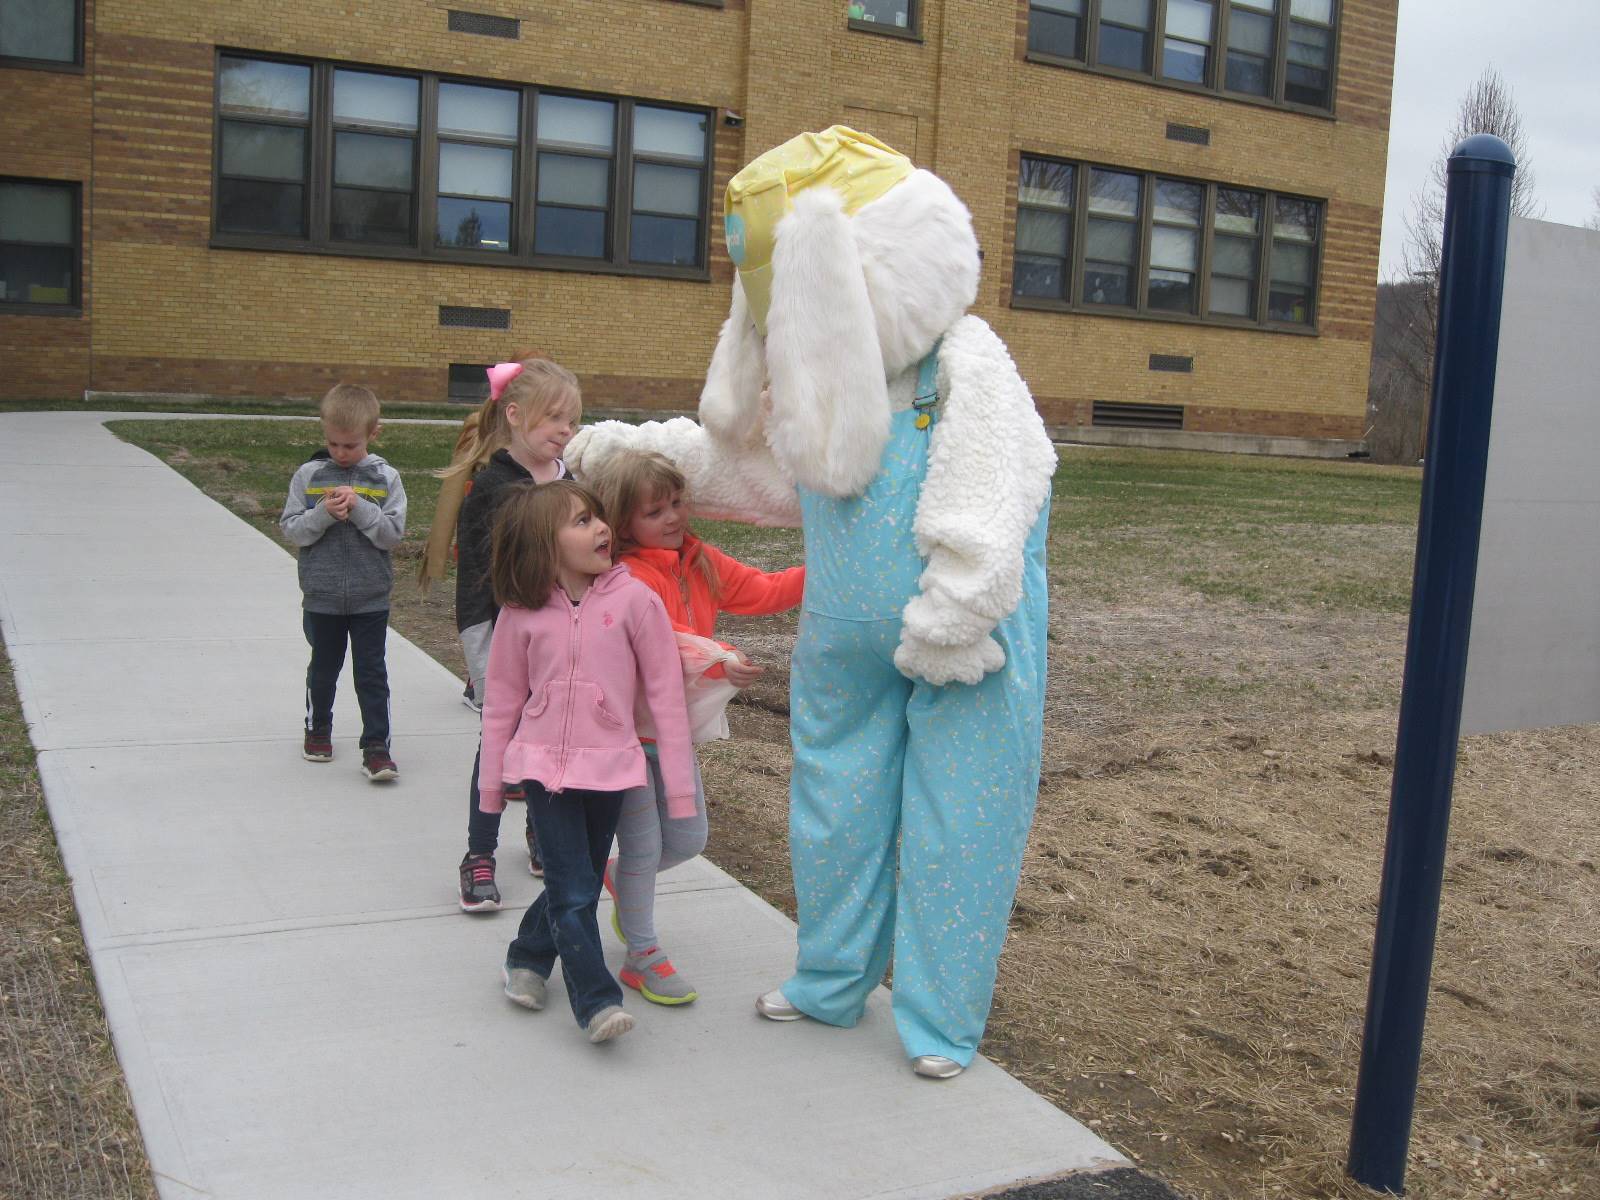 4 students give Easter Bunny a high 5!